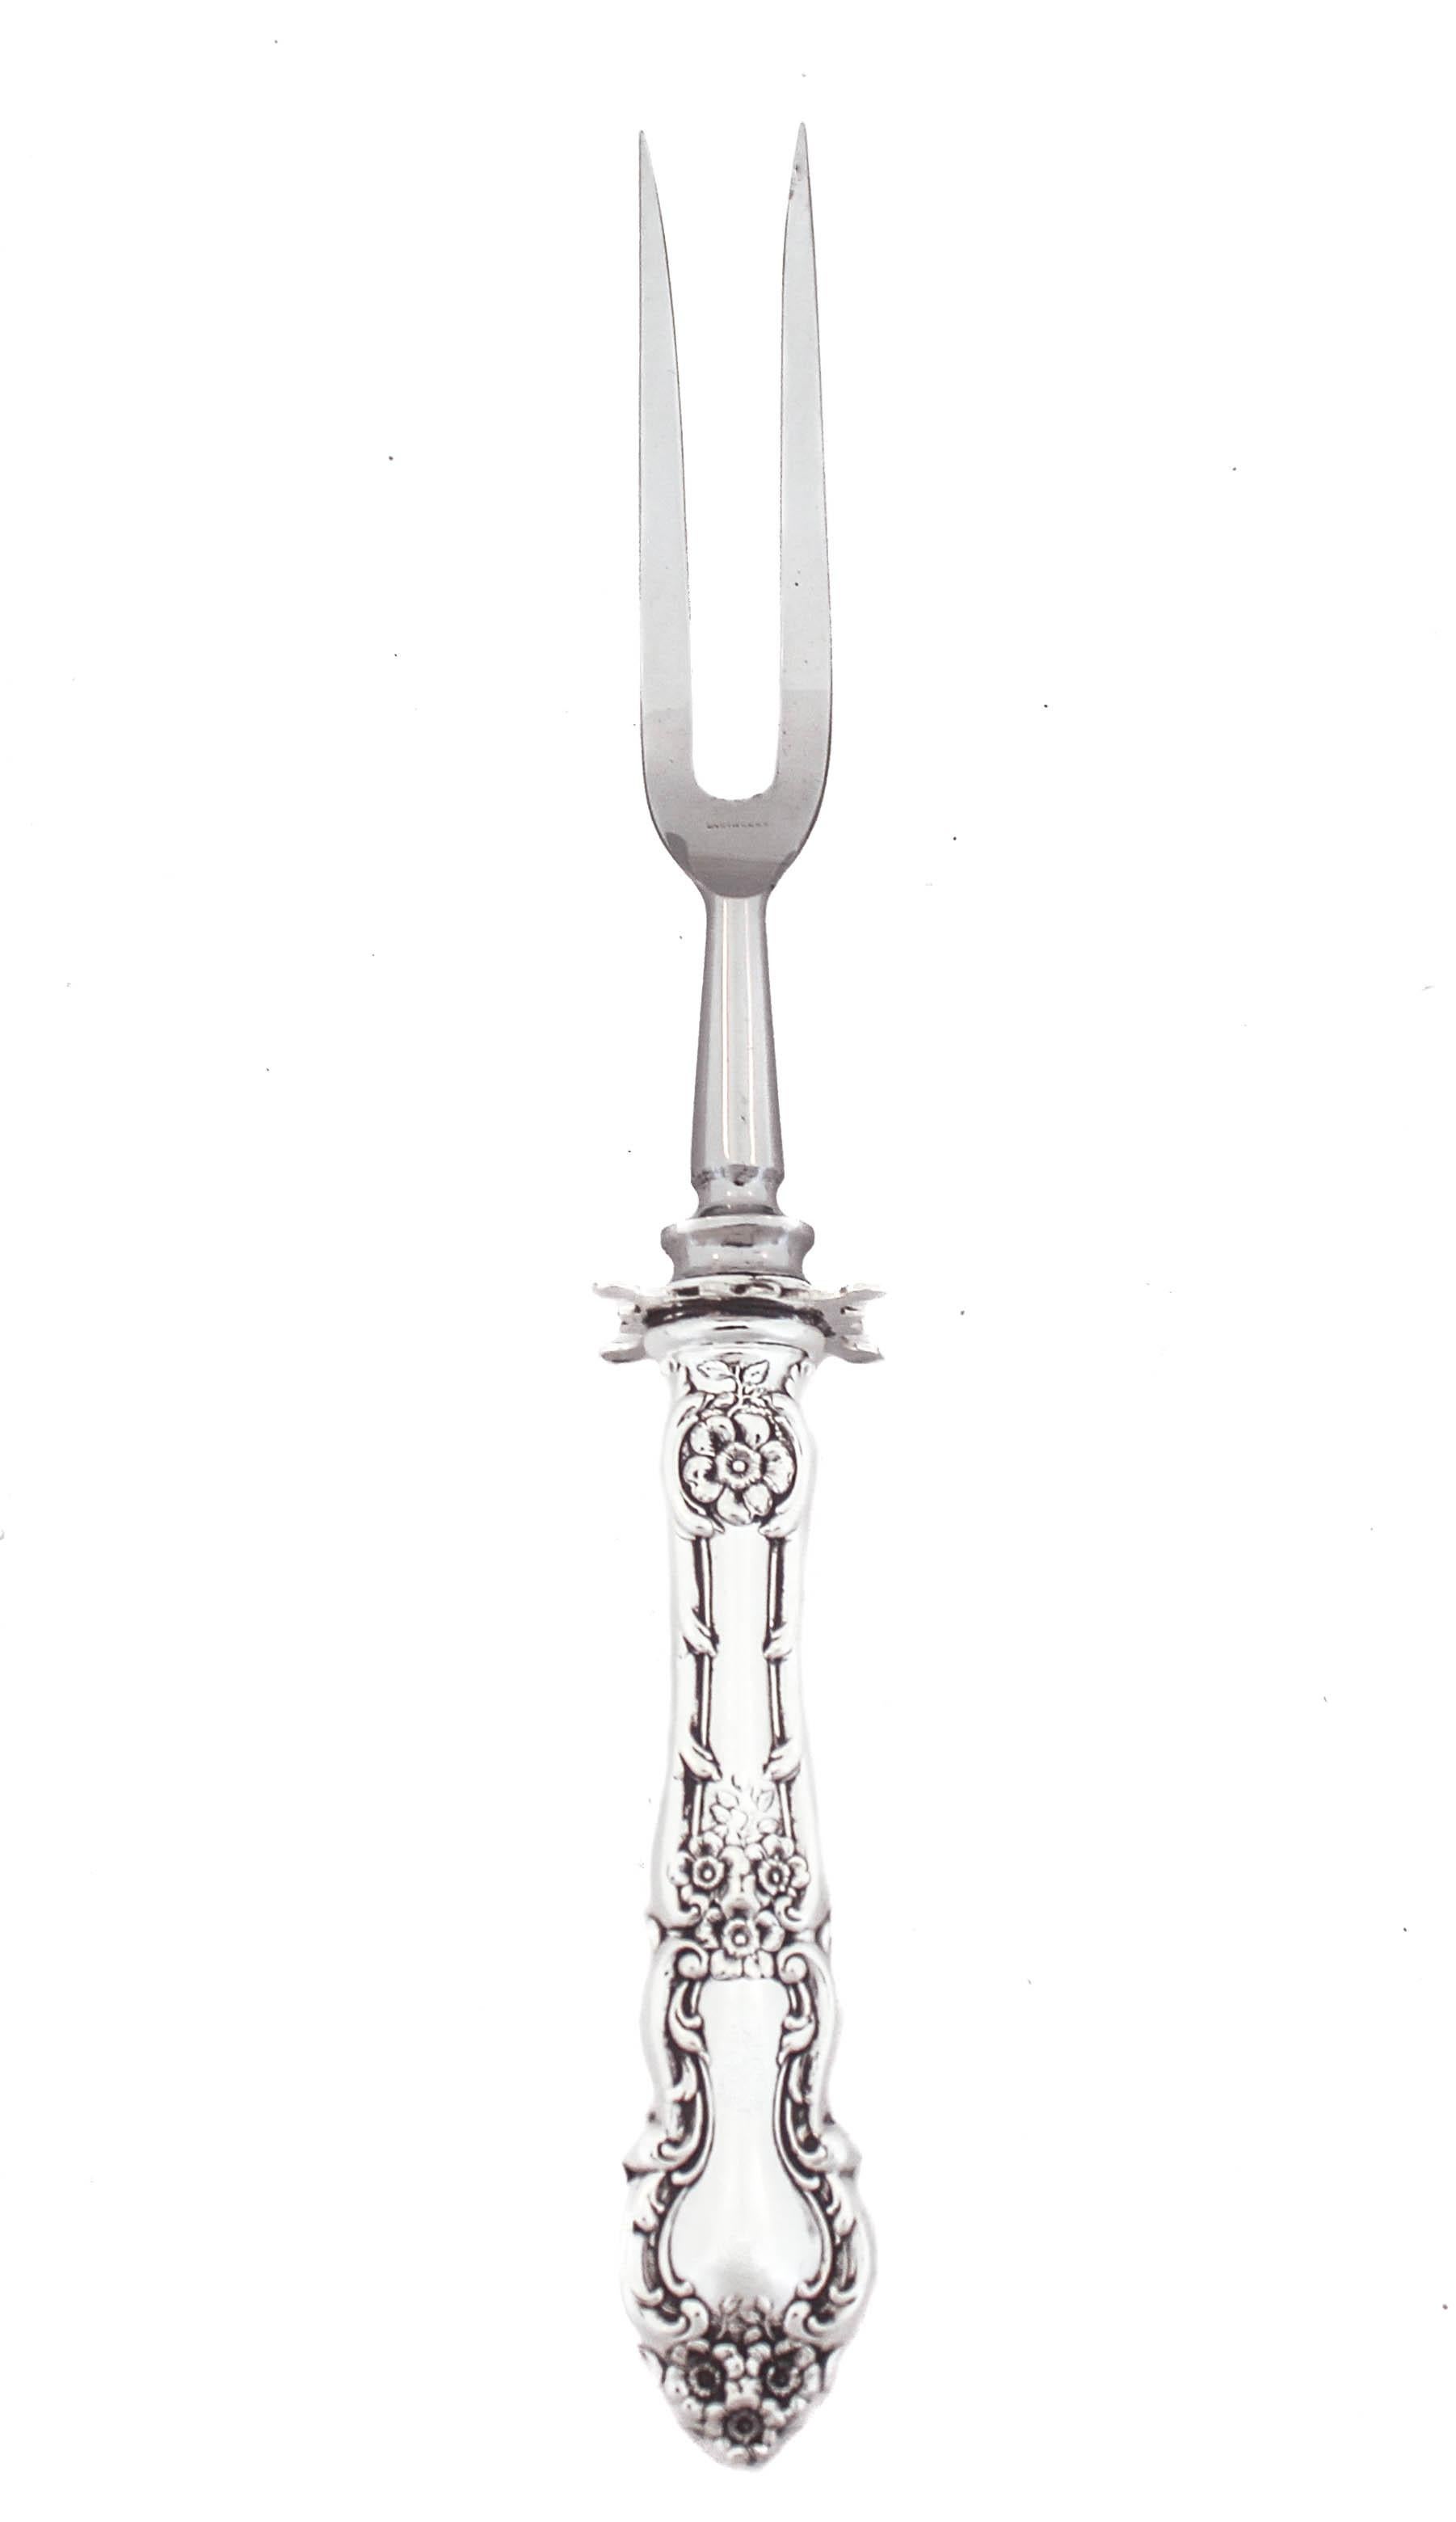 Being offered is a sterling silver carving fork and knife in the “Meadow Rose” pattern by Wallace Silversmiths, first introduced in 1907.  It has clusters of flowers on the handle and a scalloped edge.  Both pieces are large and heavy with a square